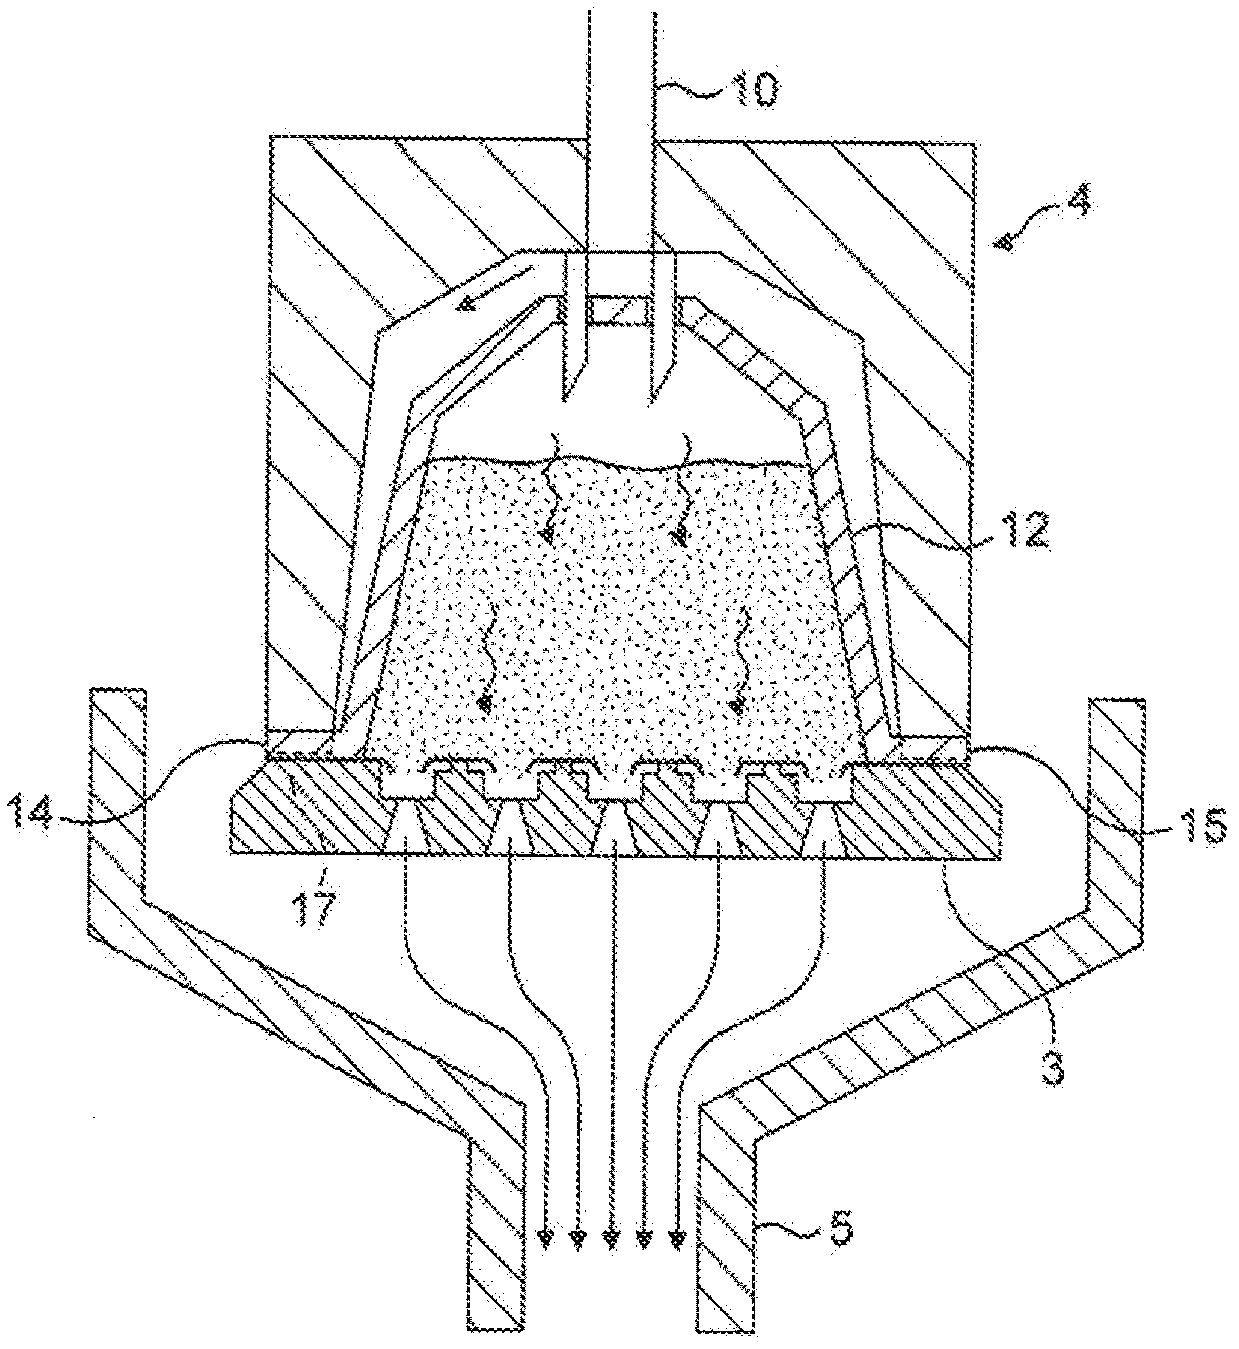 Capsule and method for preparing a beverage such as coffee from said capsule